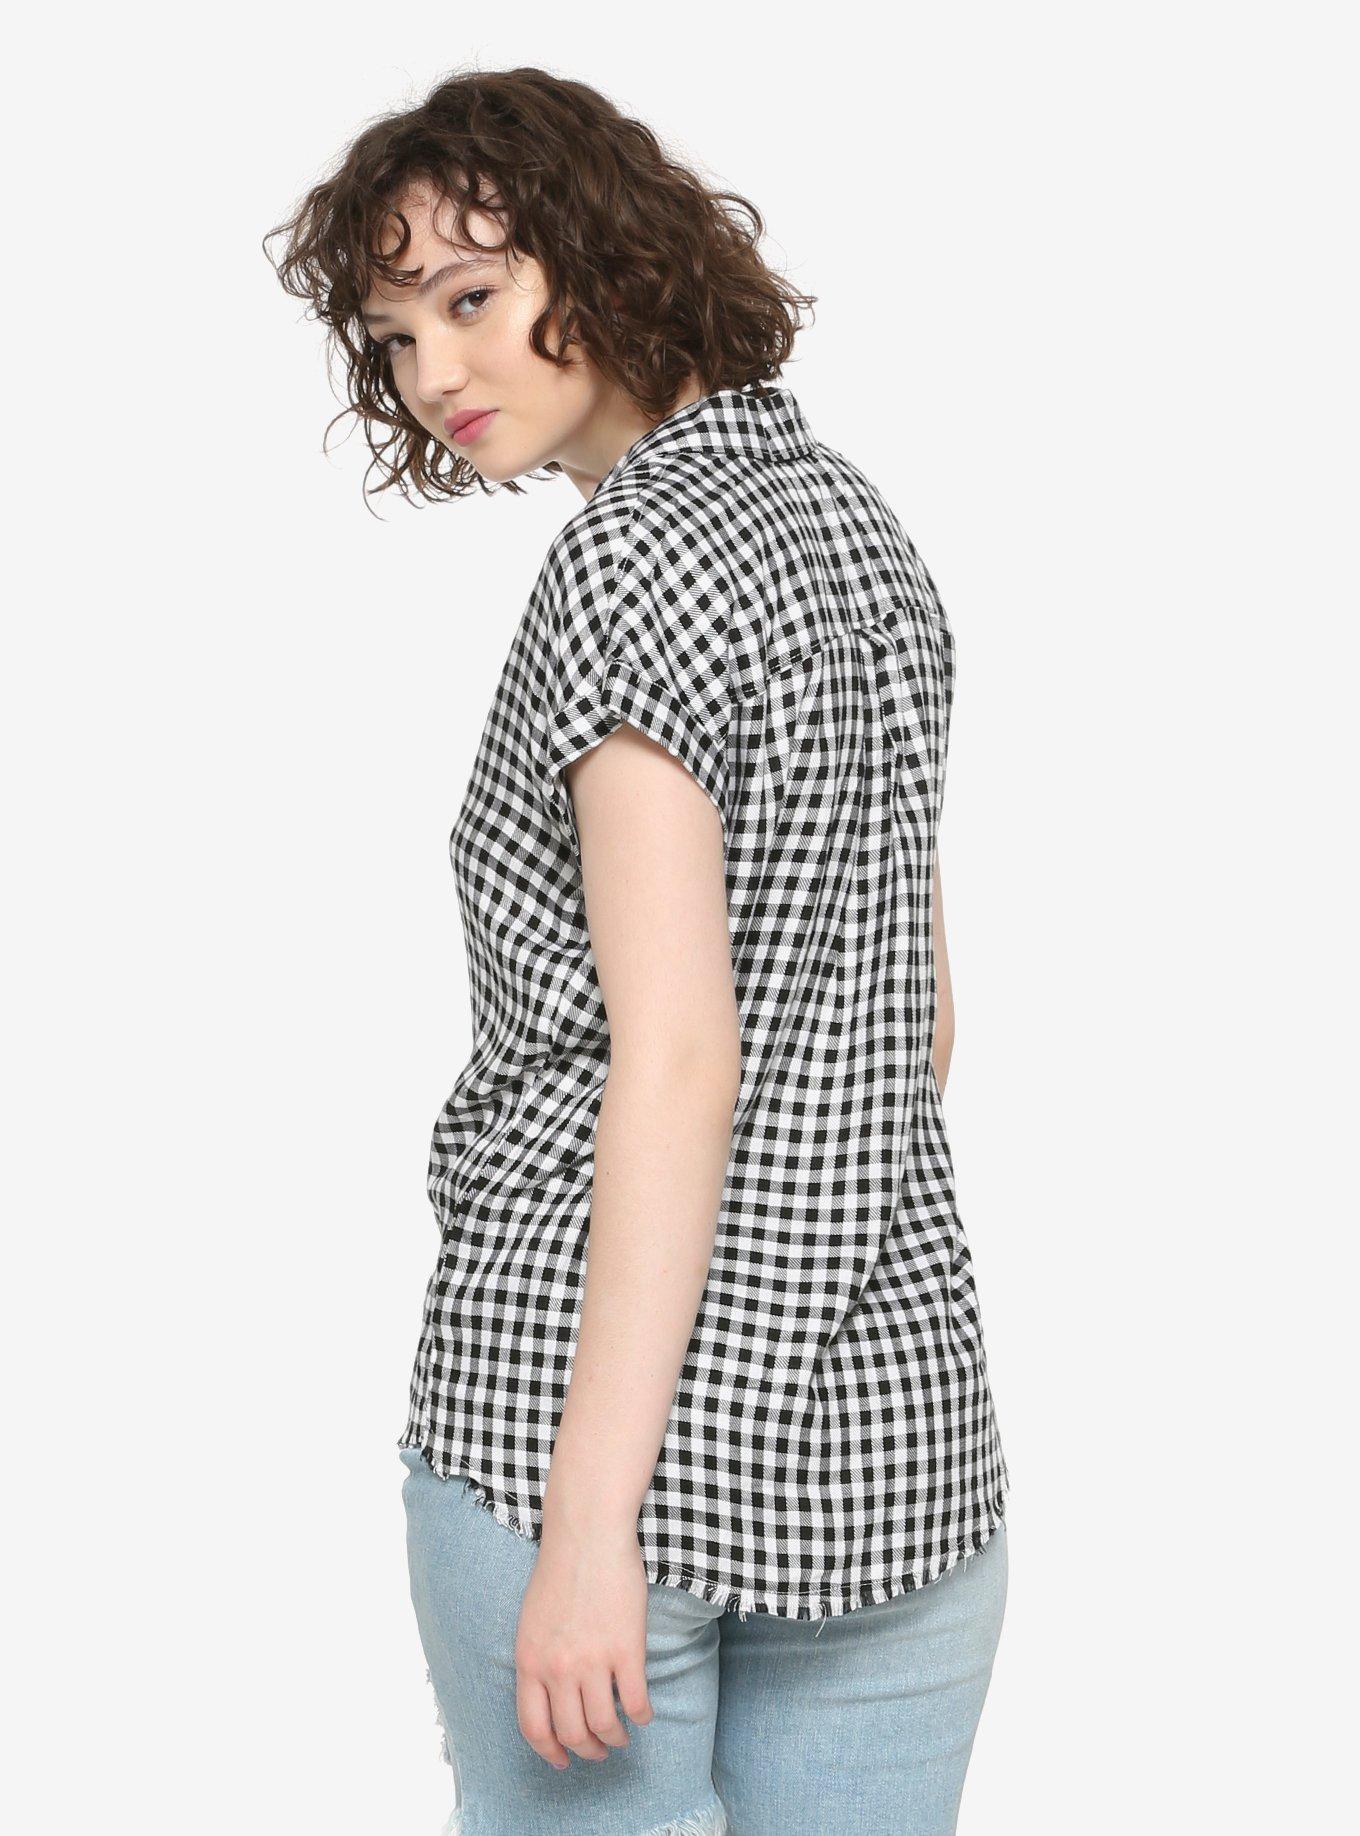 Black & White Gingham Girls Button-Up Woven Top, PLAID, alternate